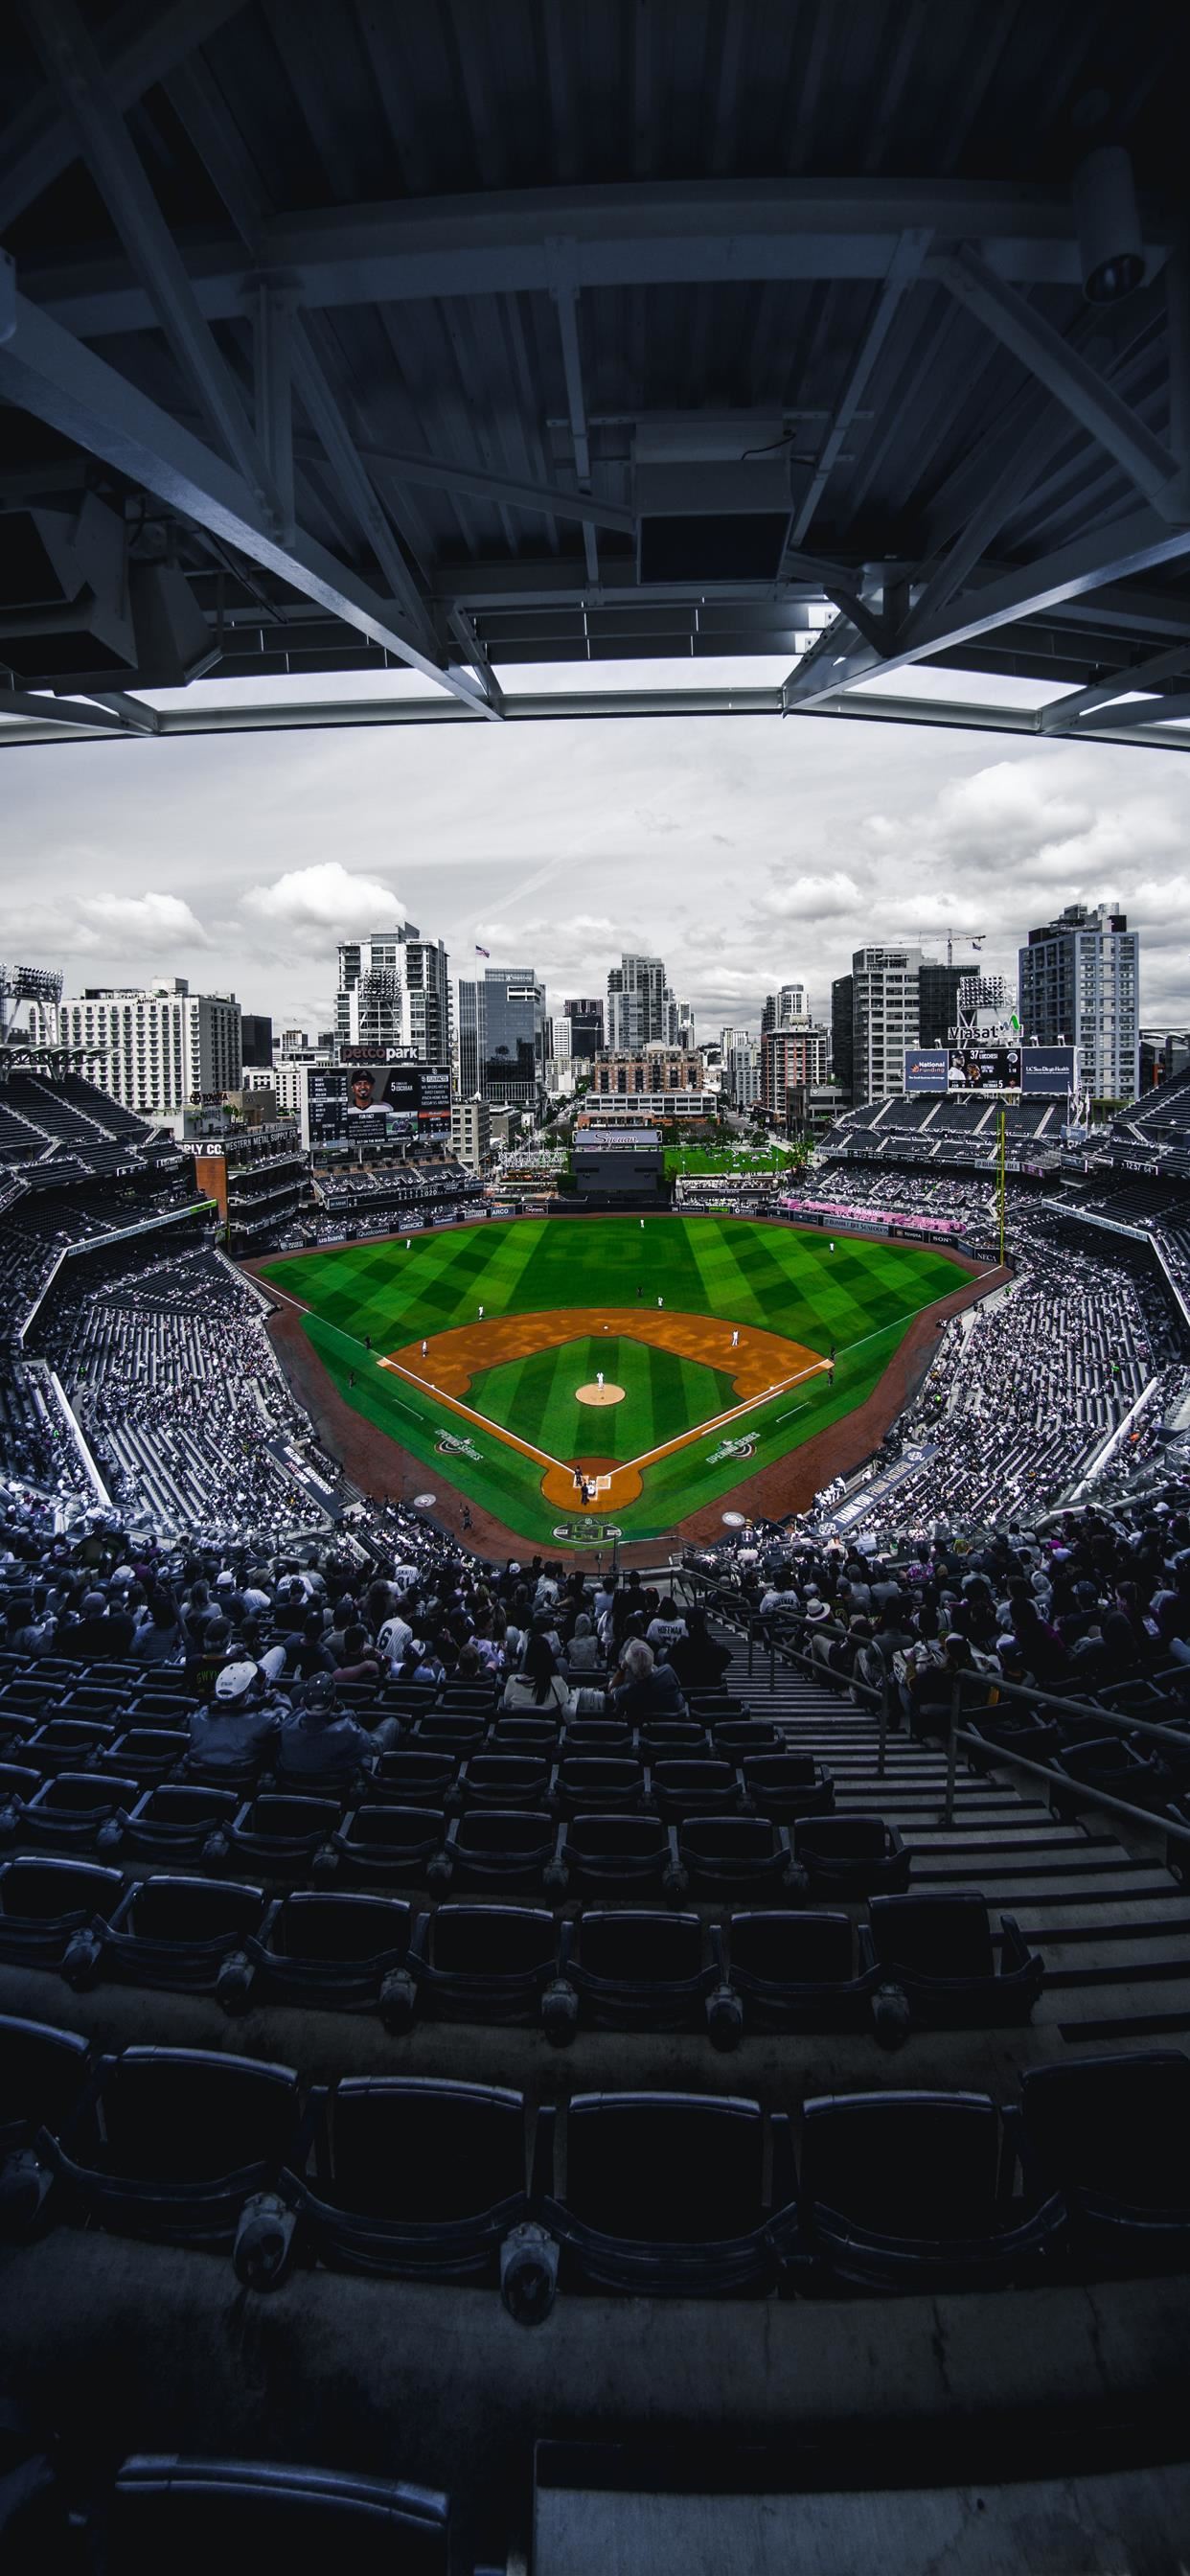 Petco Park San Diego United States iPhone Wallpaper Free Download